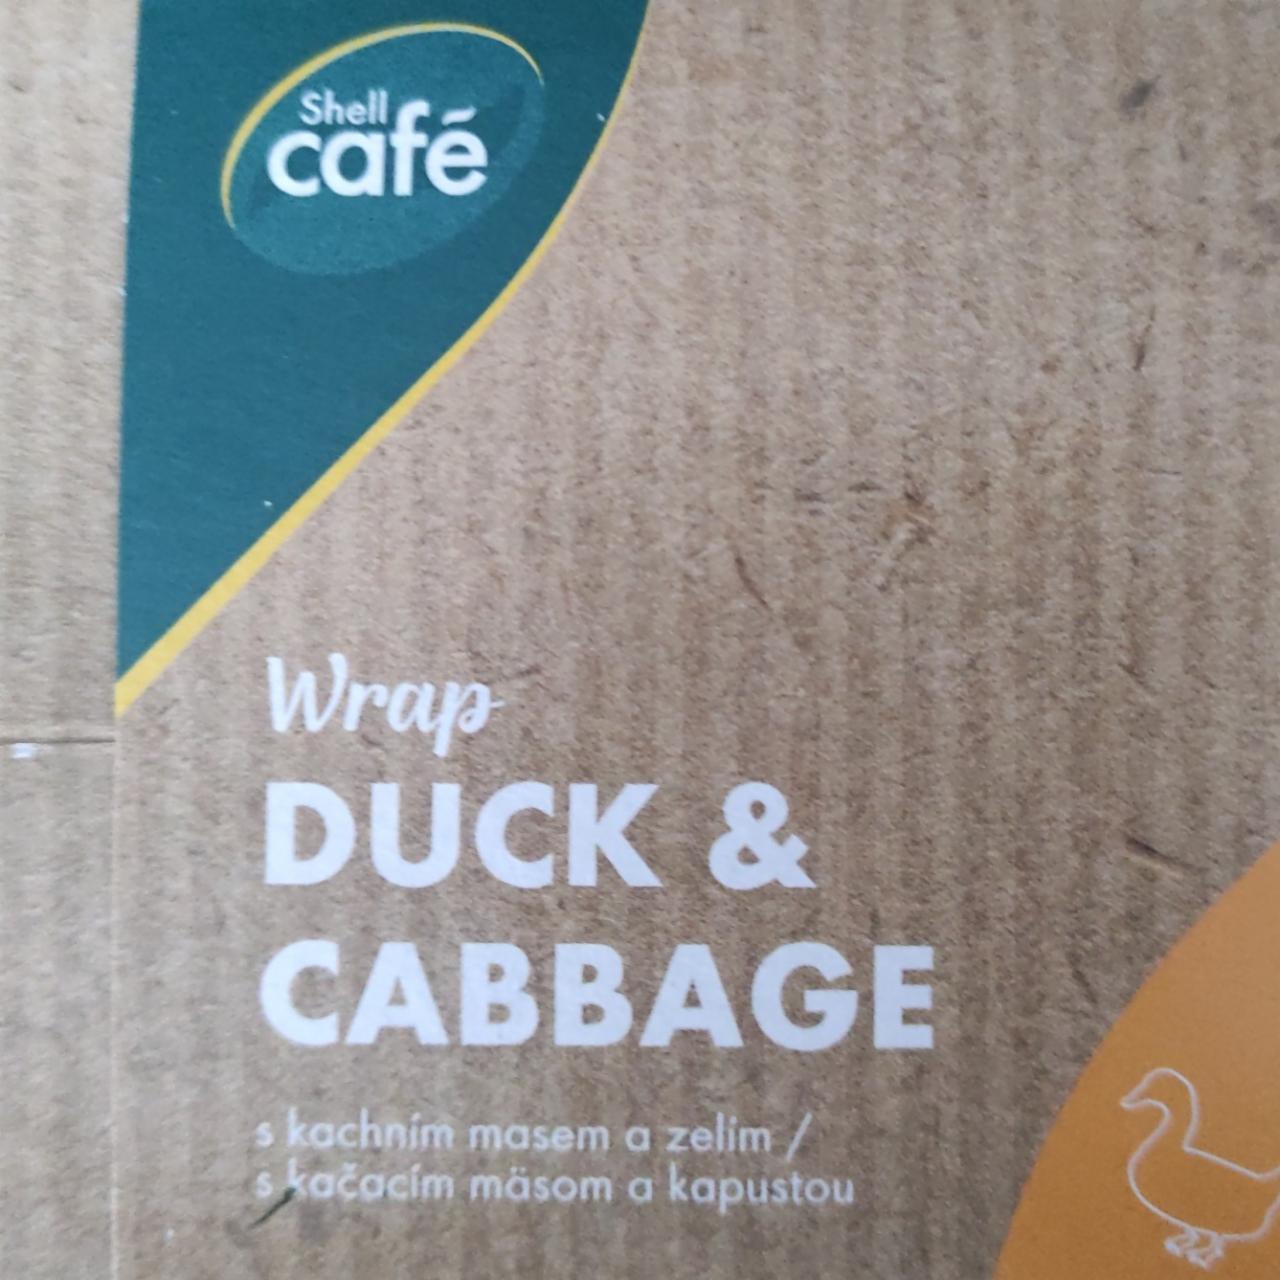 Fotografie - Wrap Duck&Cabbage Shell cafe